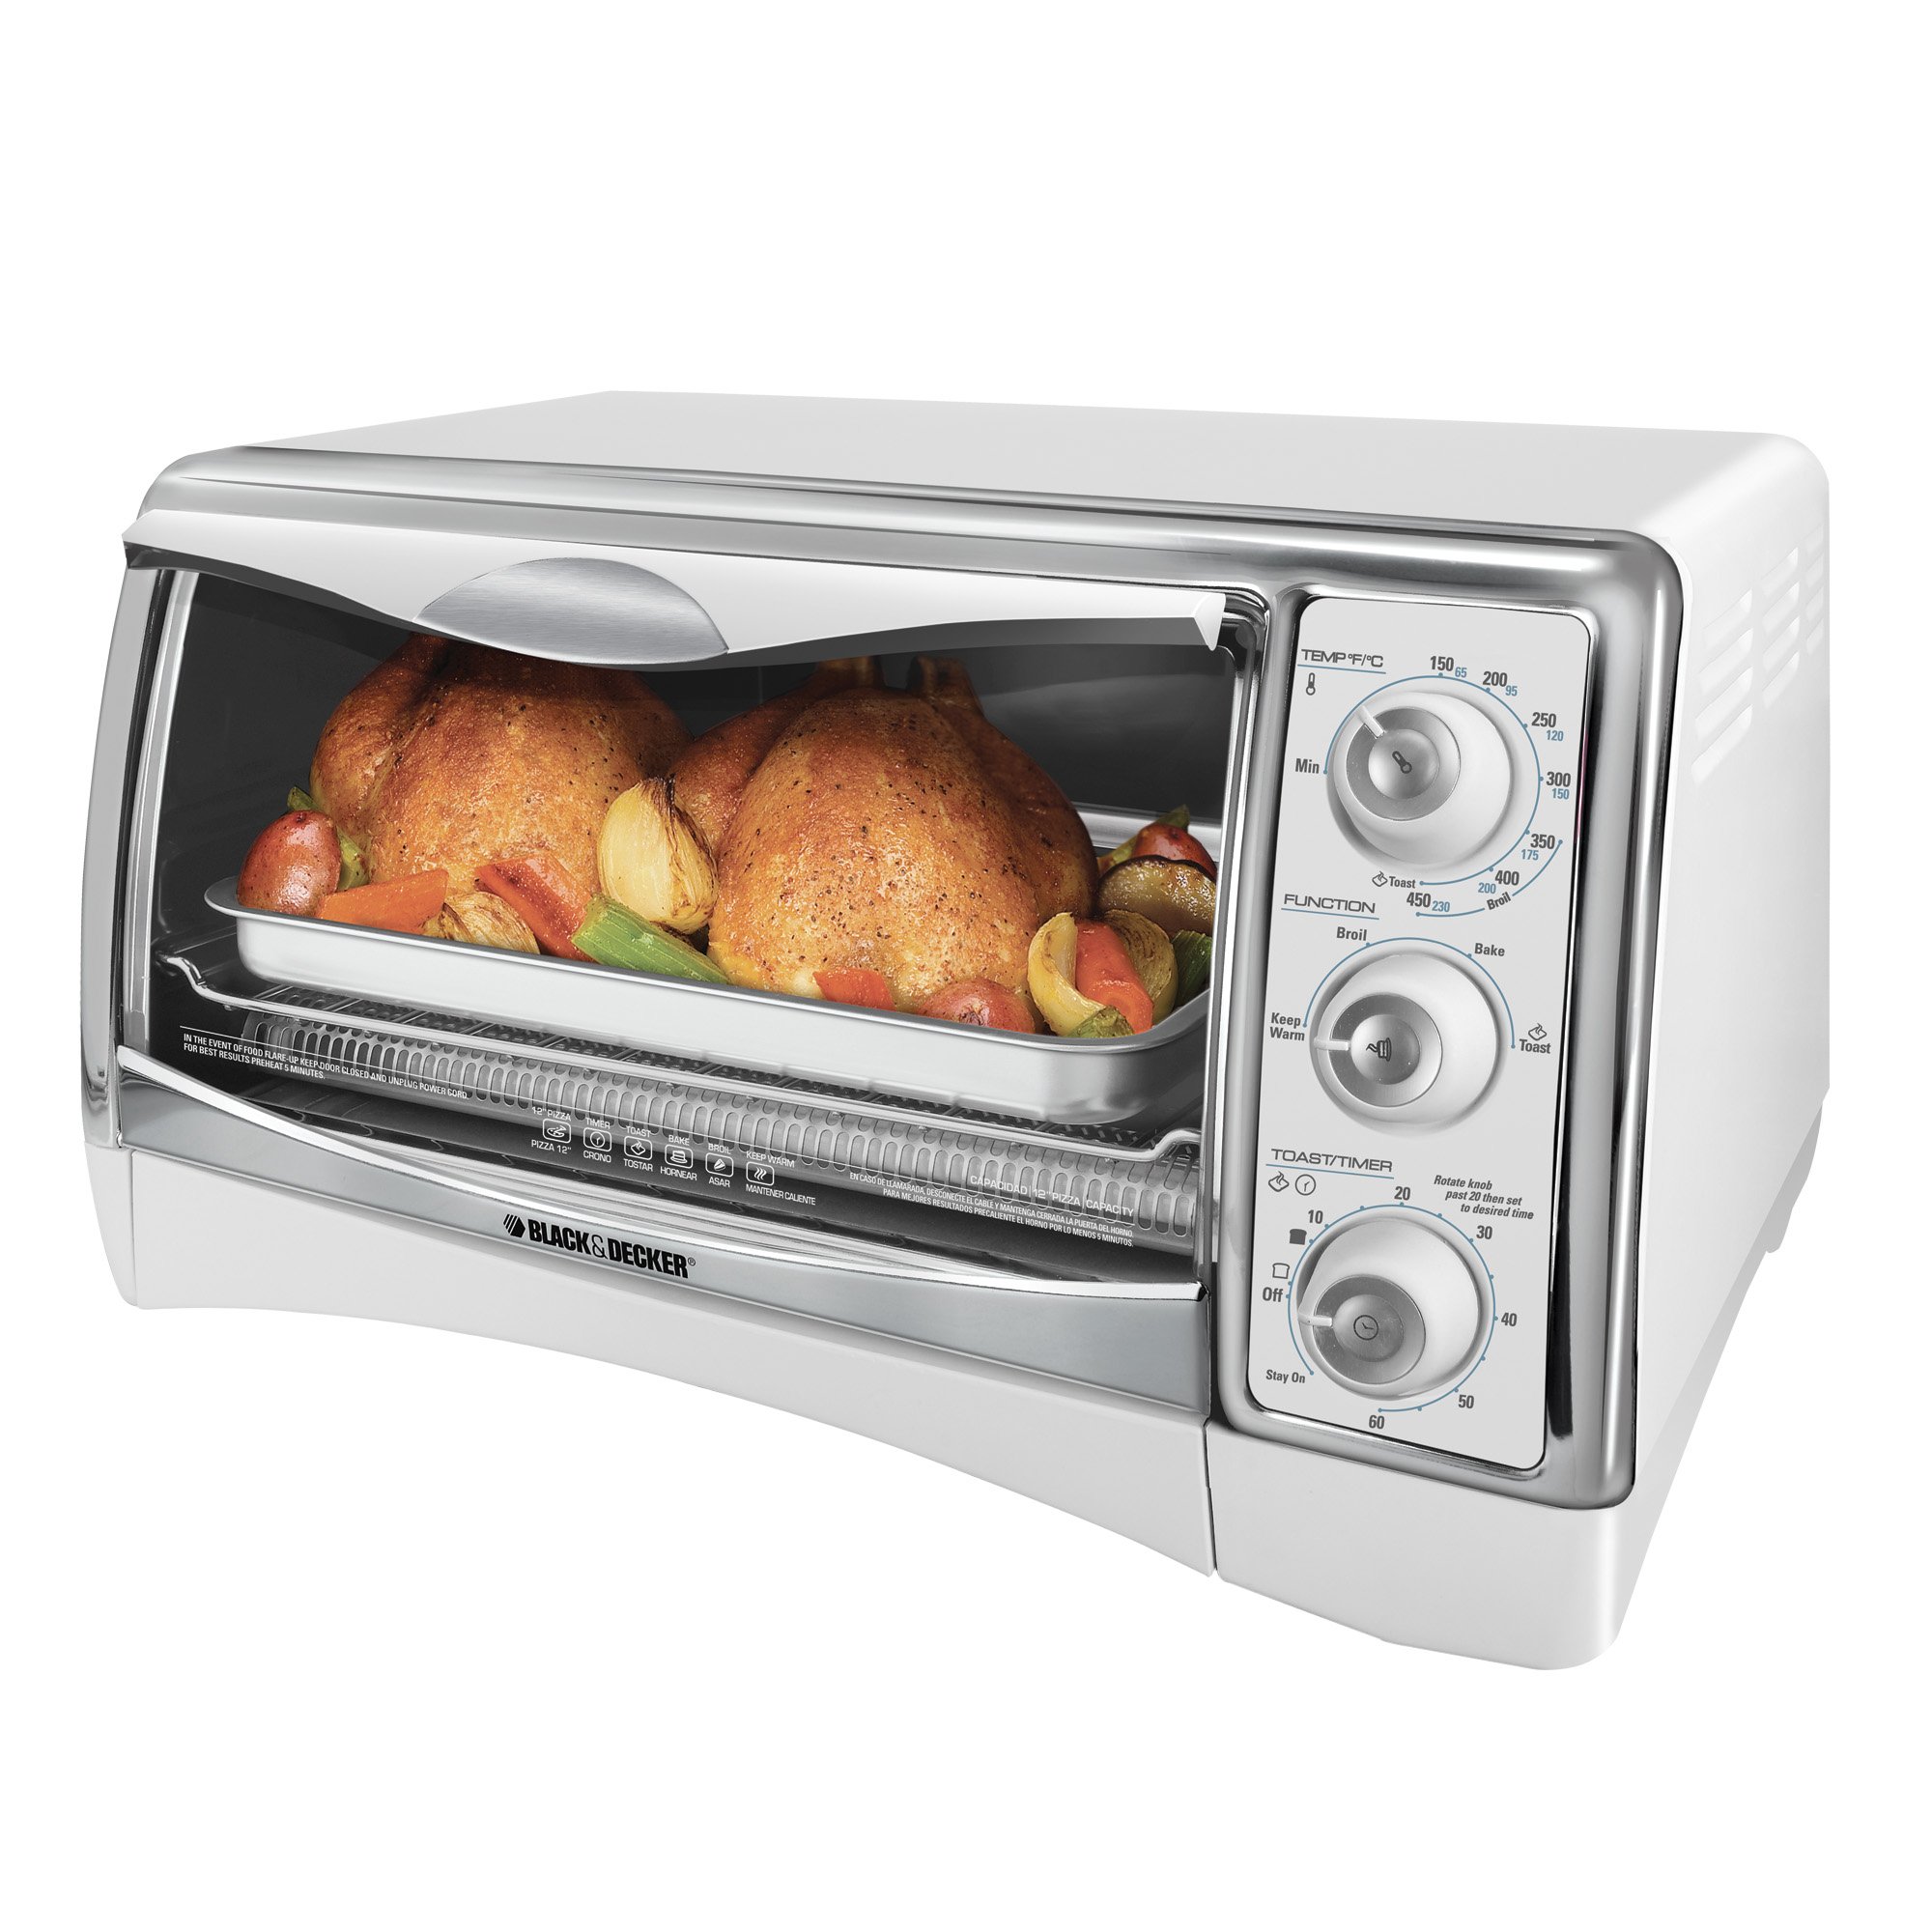 Perfect Broil Toast-R-Oven TRO4200B